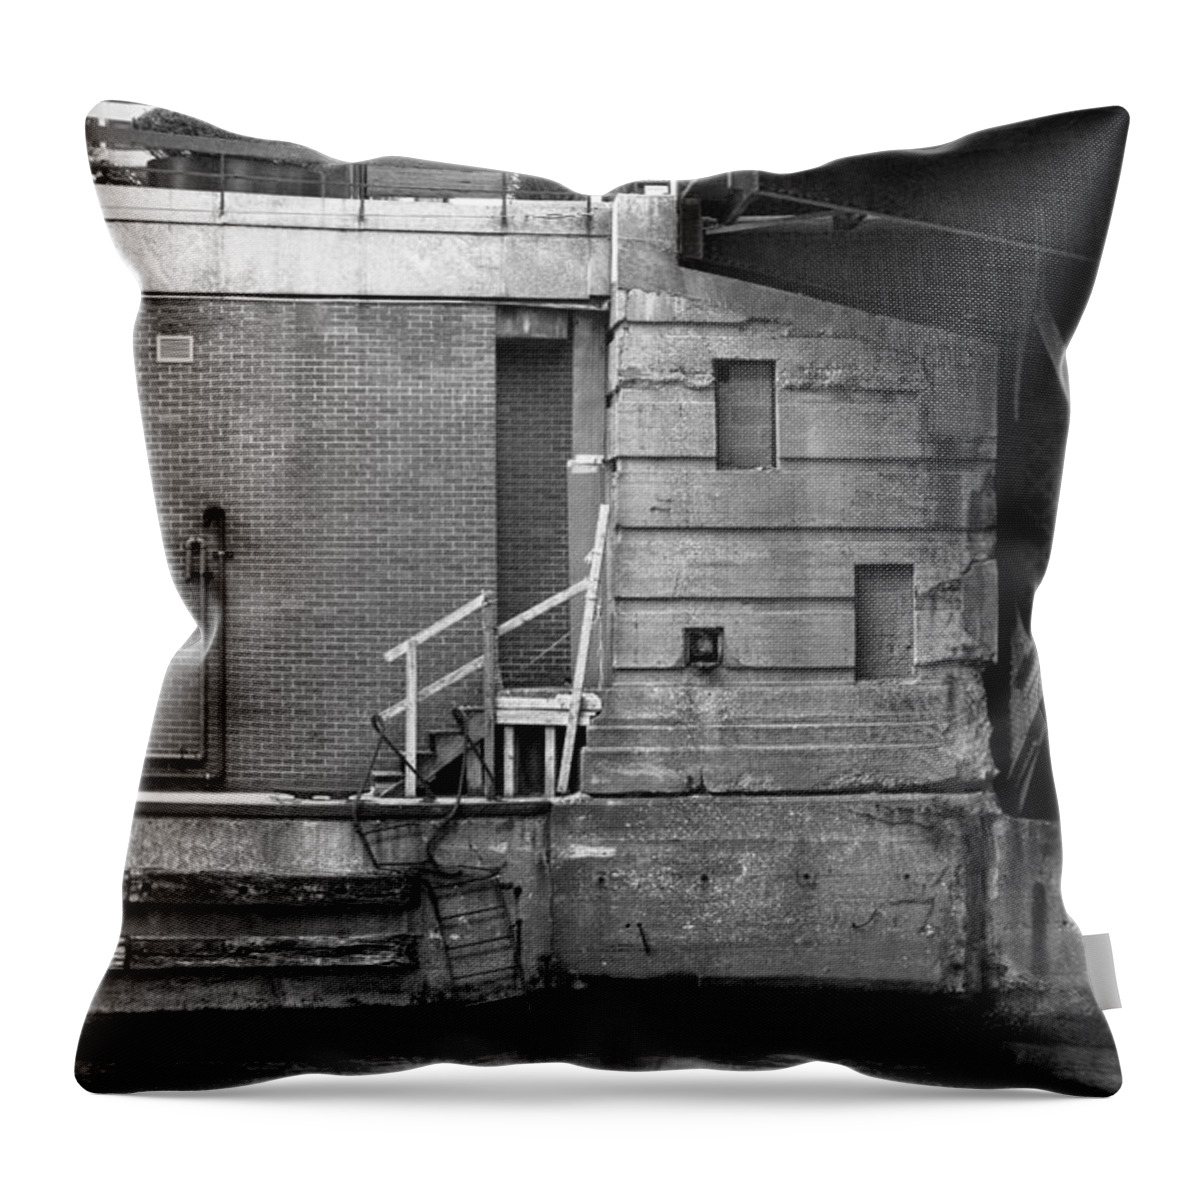 Chicago Throw Pillow featuring the photograph City - Chicago IL - Failure by Mike Savad